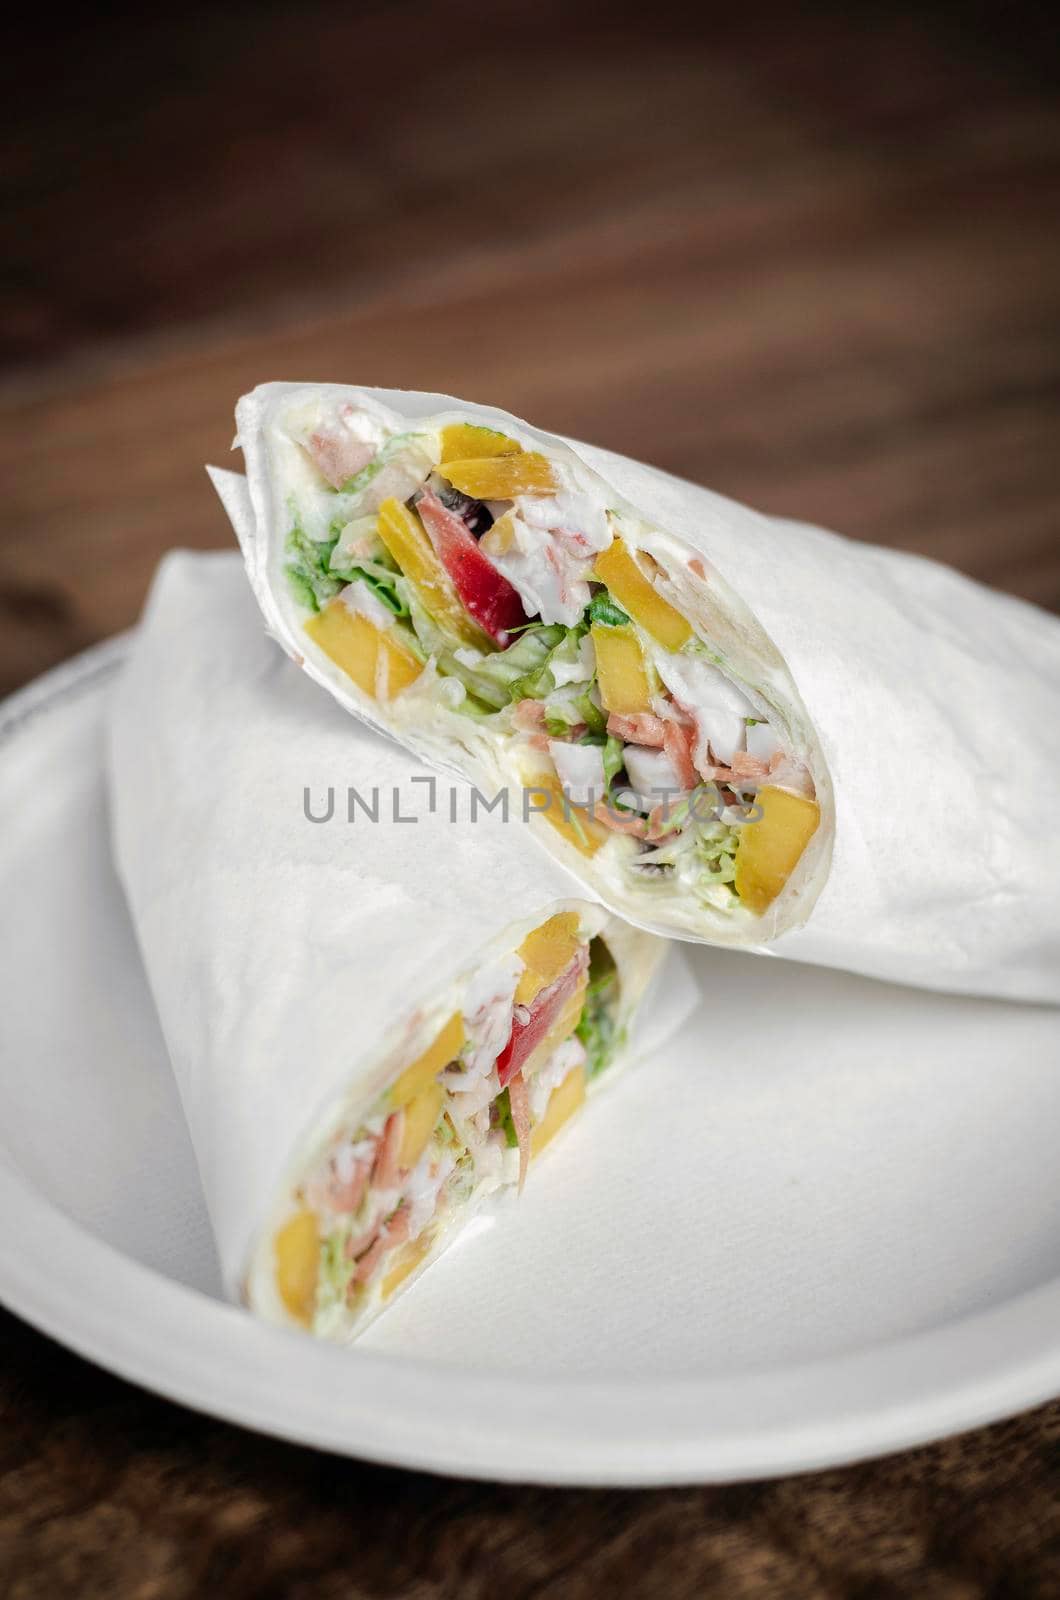 crab mayonnaise and salad wrap on wooden table background